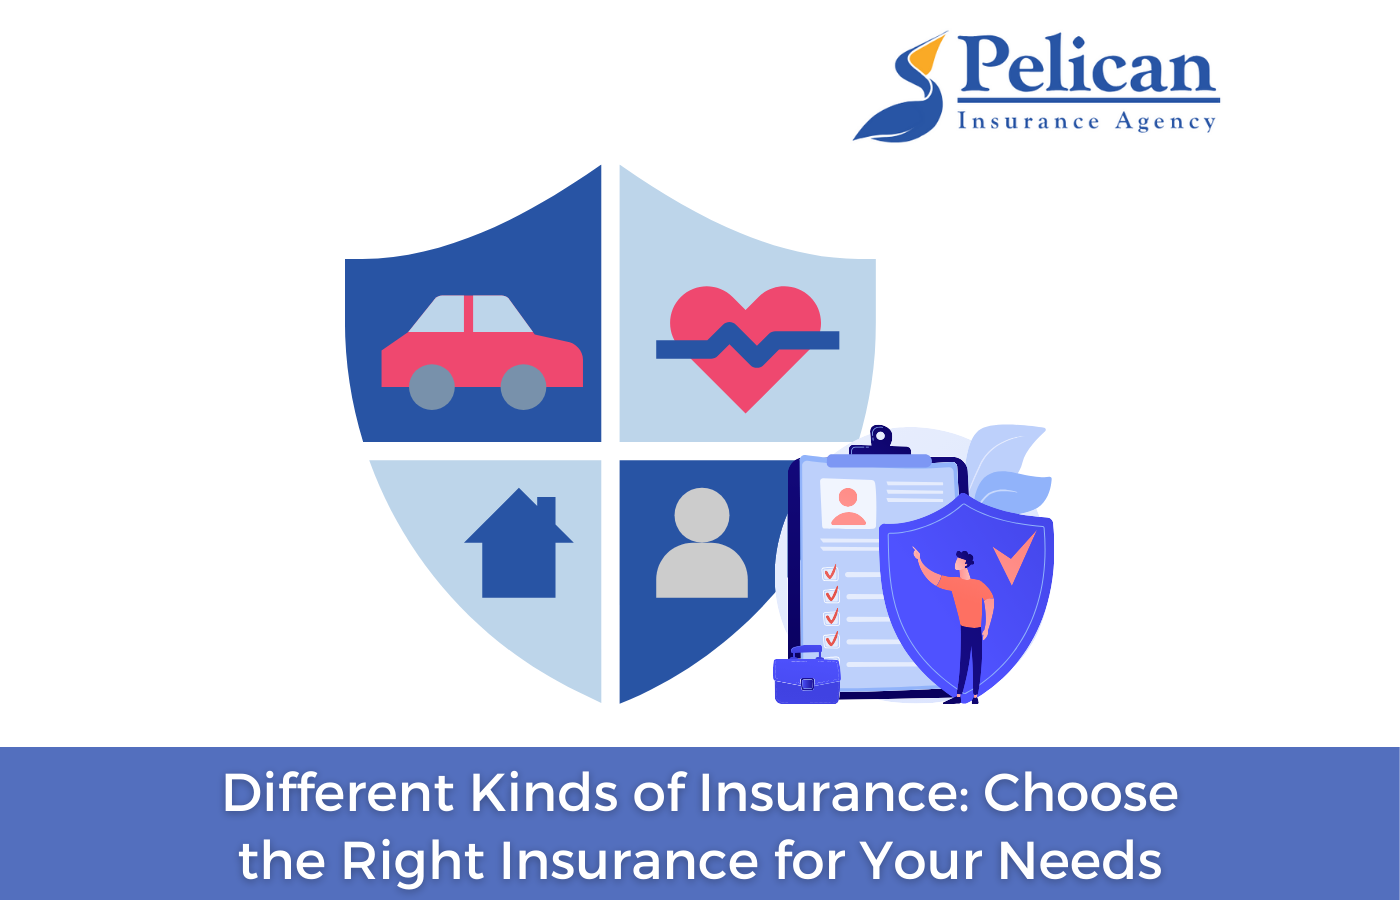 The Different Kinds of Insurance: Choose the Right Insurance for Your Needs